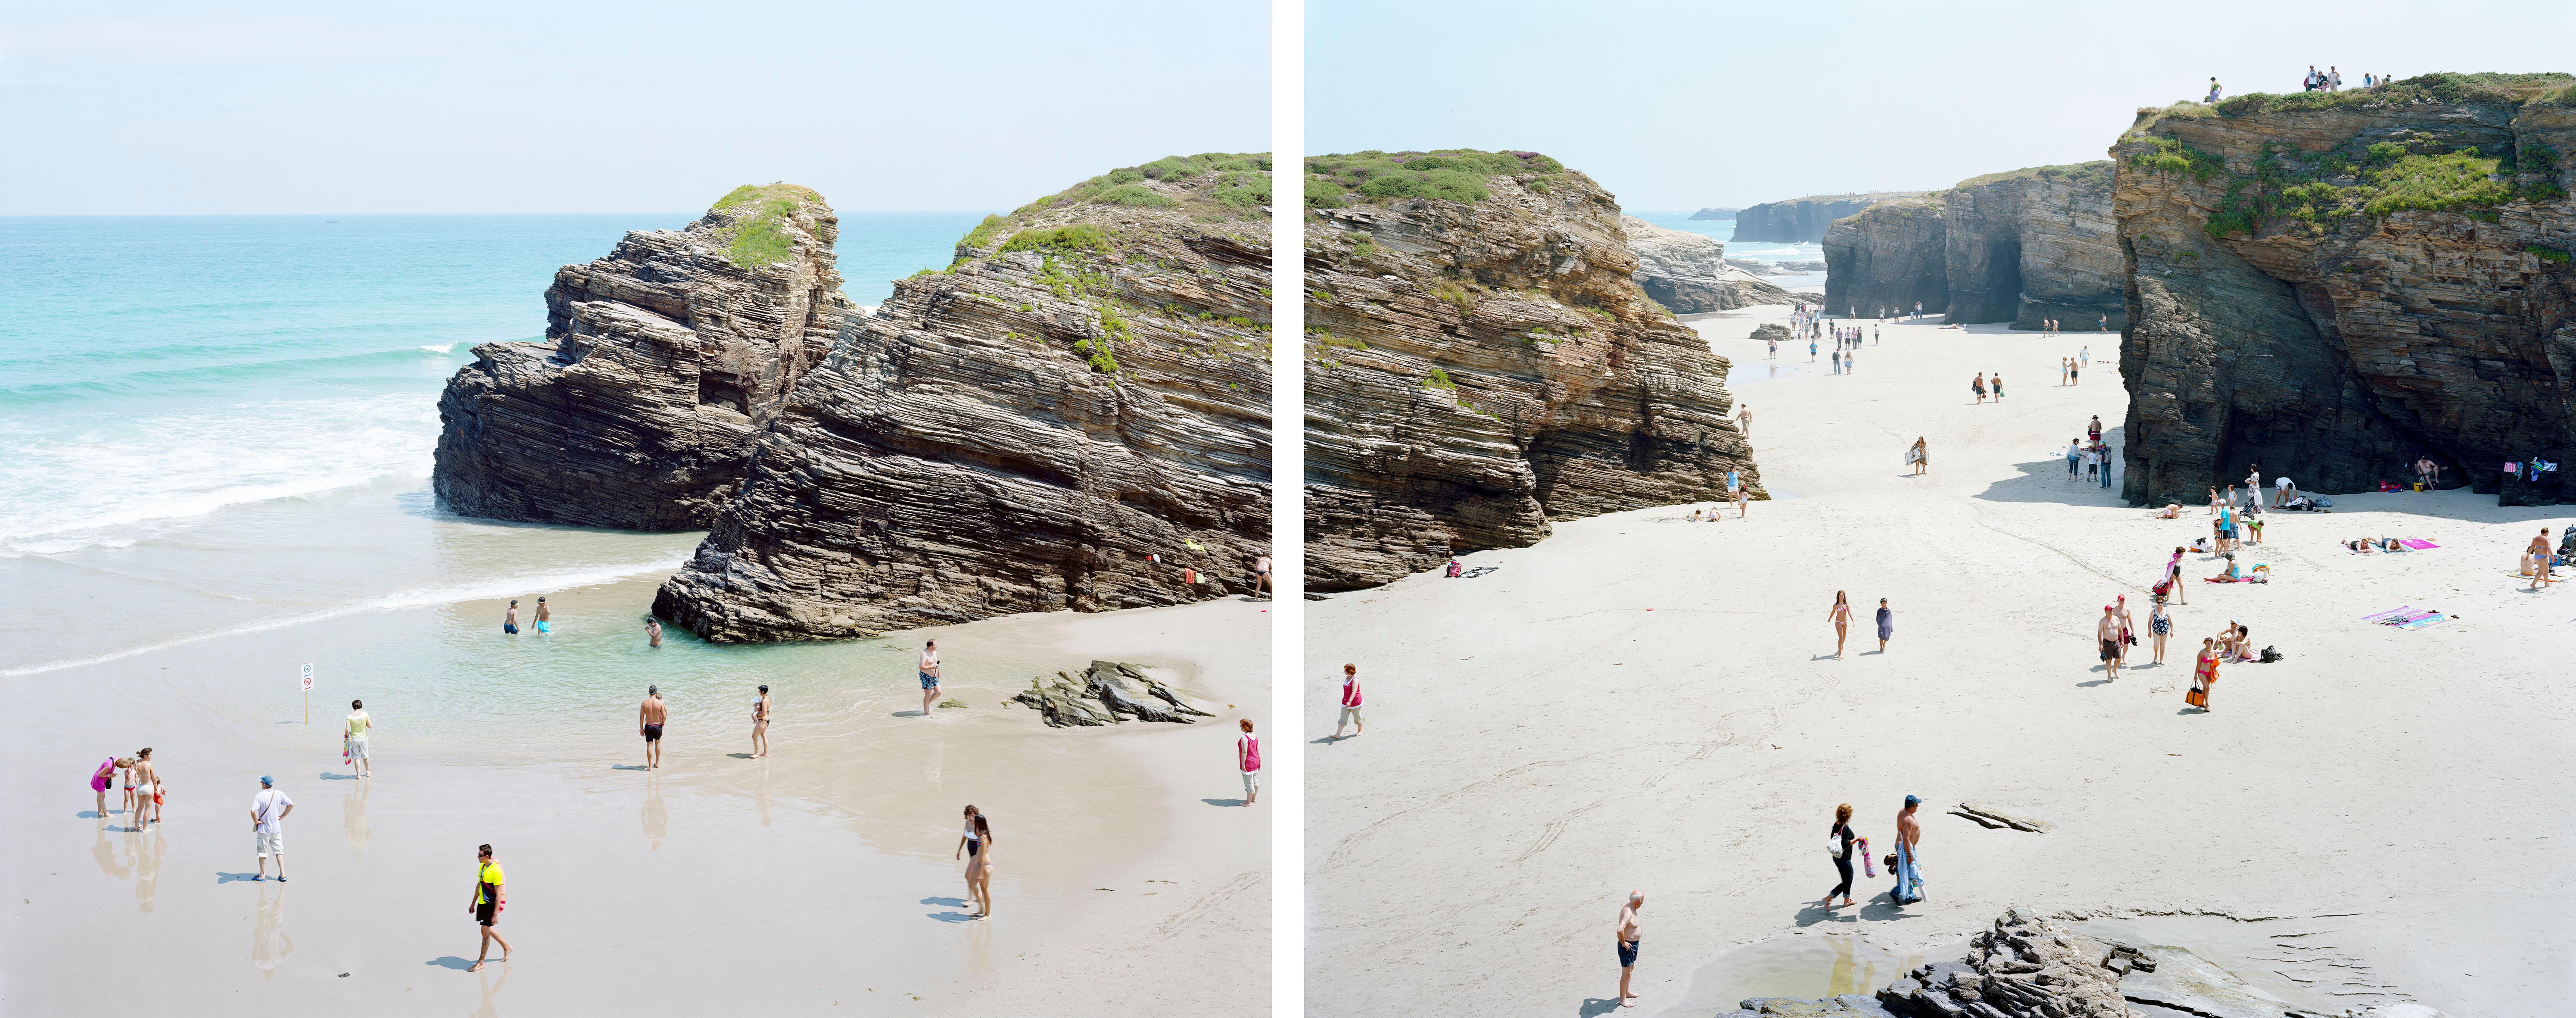 #442 Las Catedrales Diptych - Photograph by Massimo Vitali